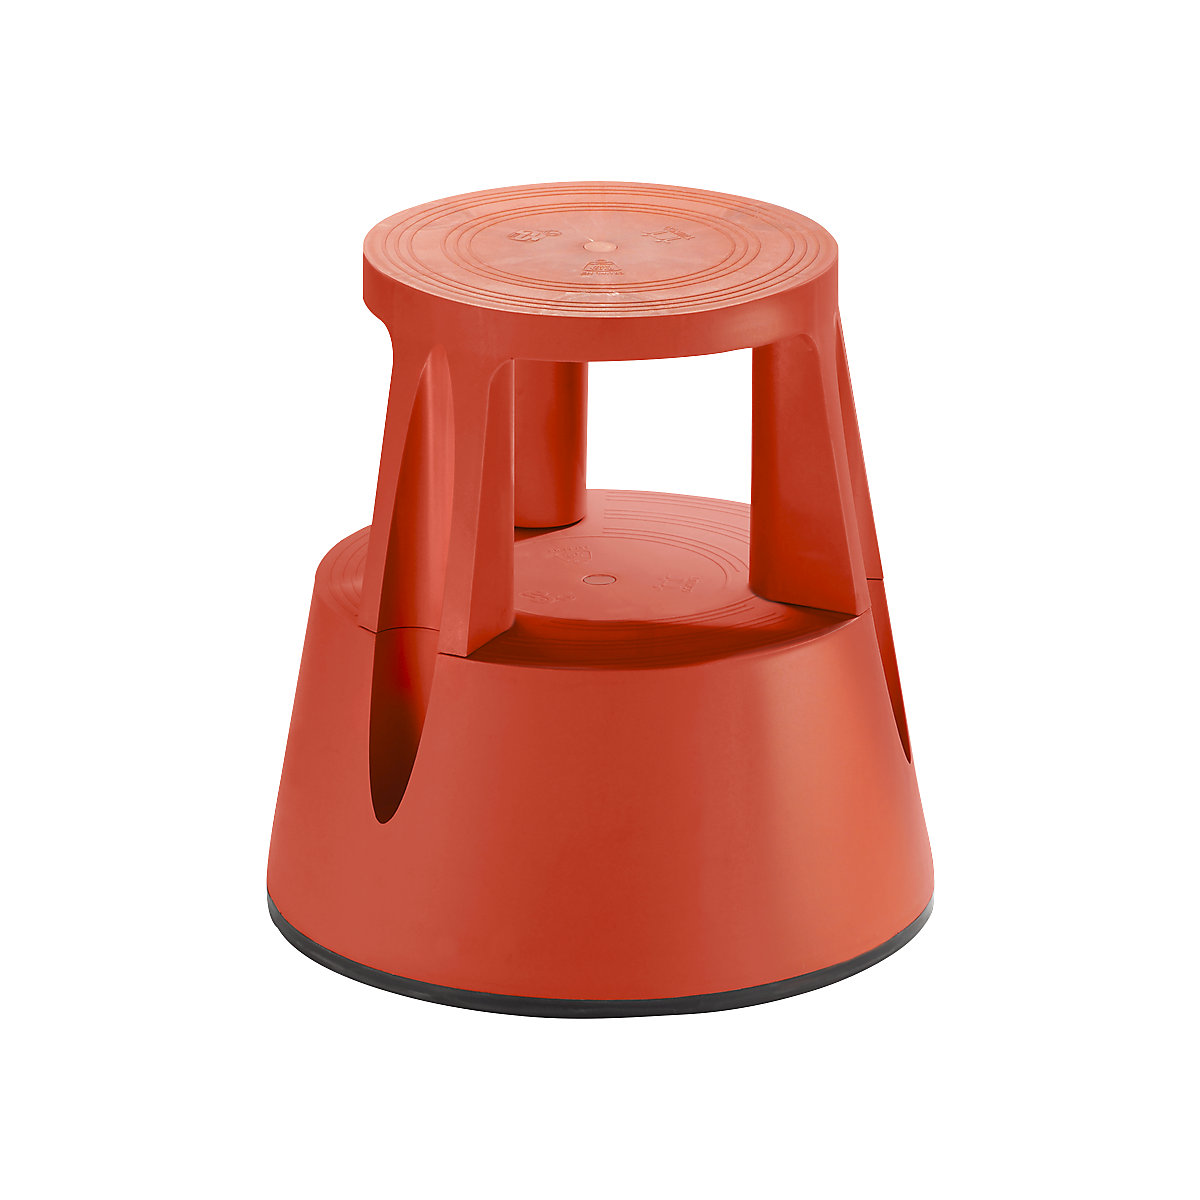 Kick stool made of shatterproof plastic – Twinco, max. load 150 kg, height under load 410 mm, red-5